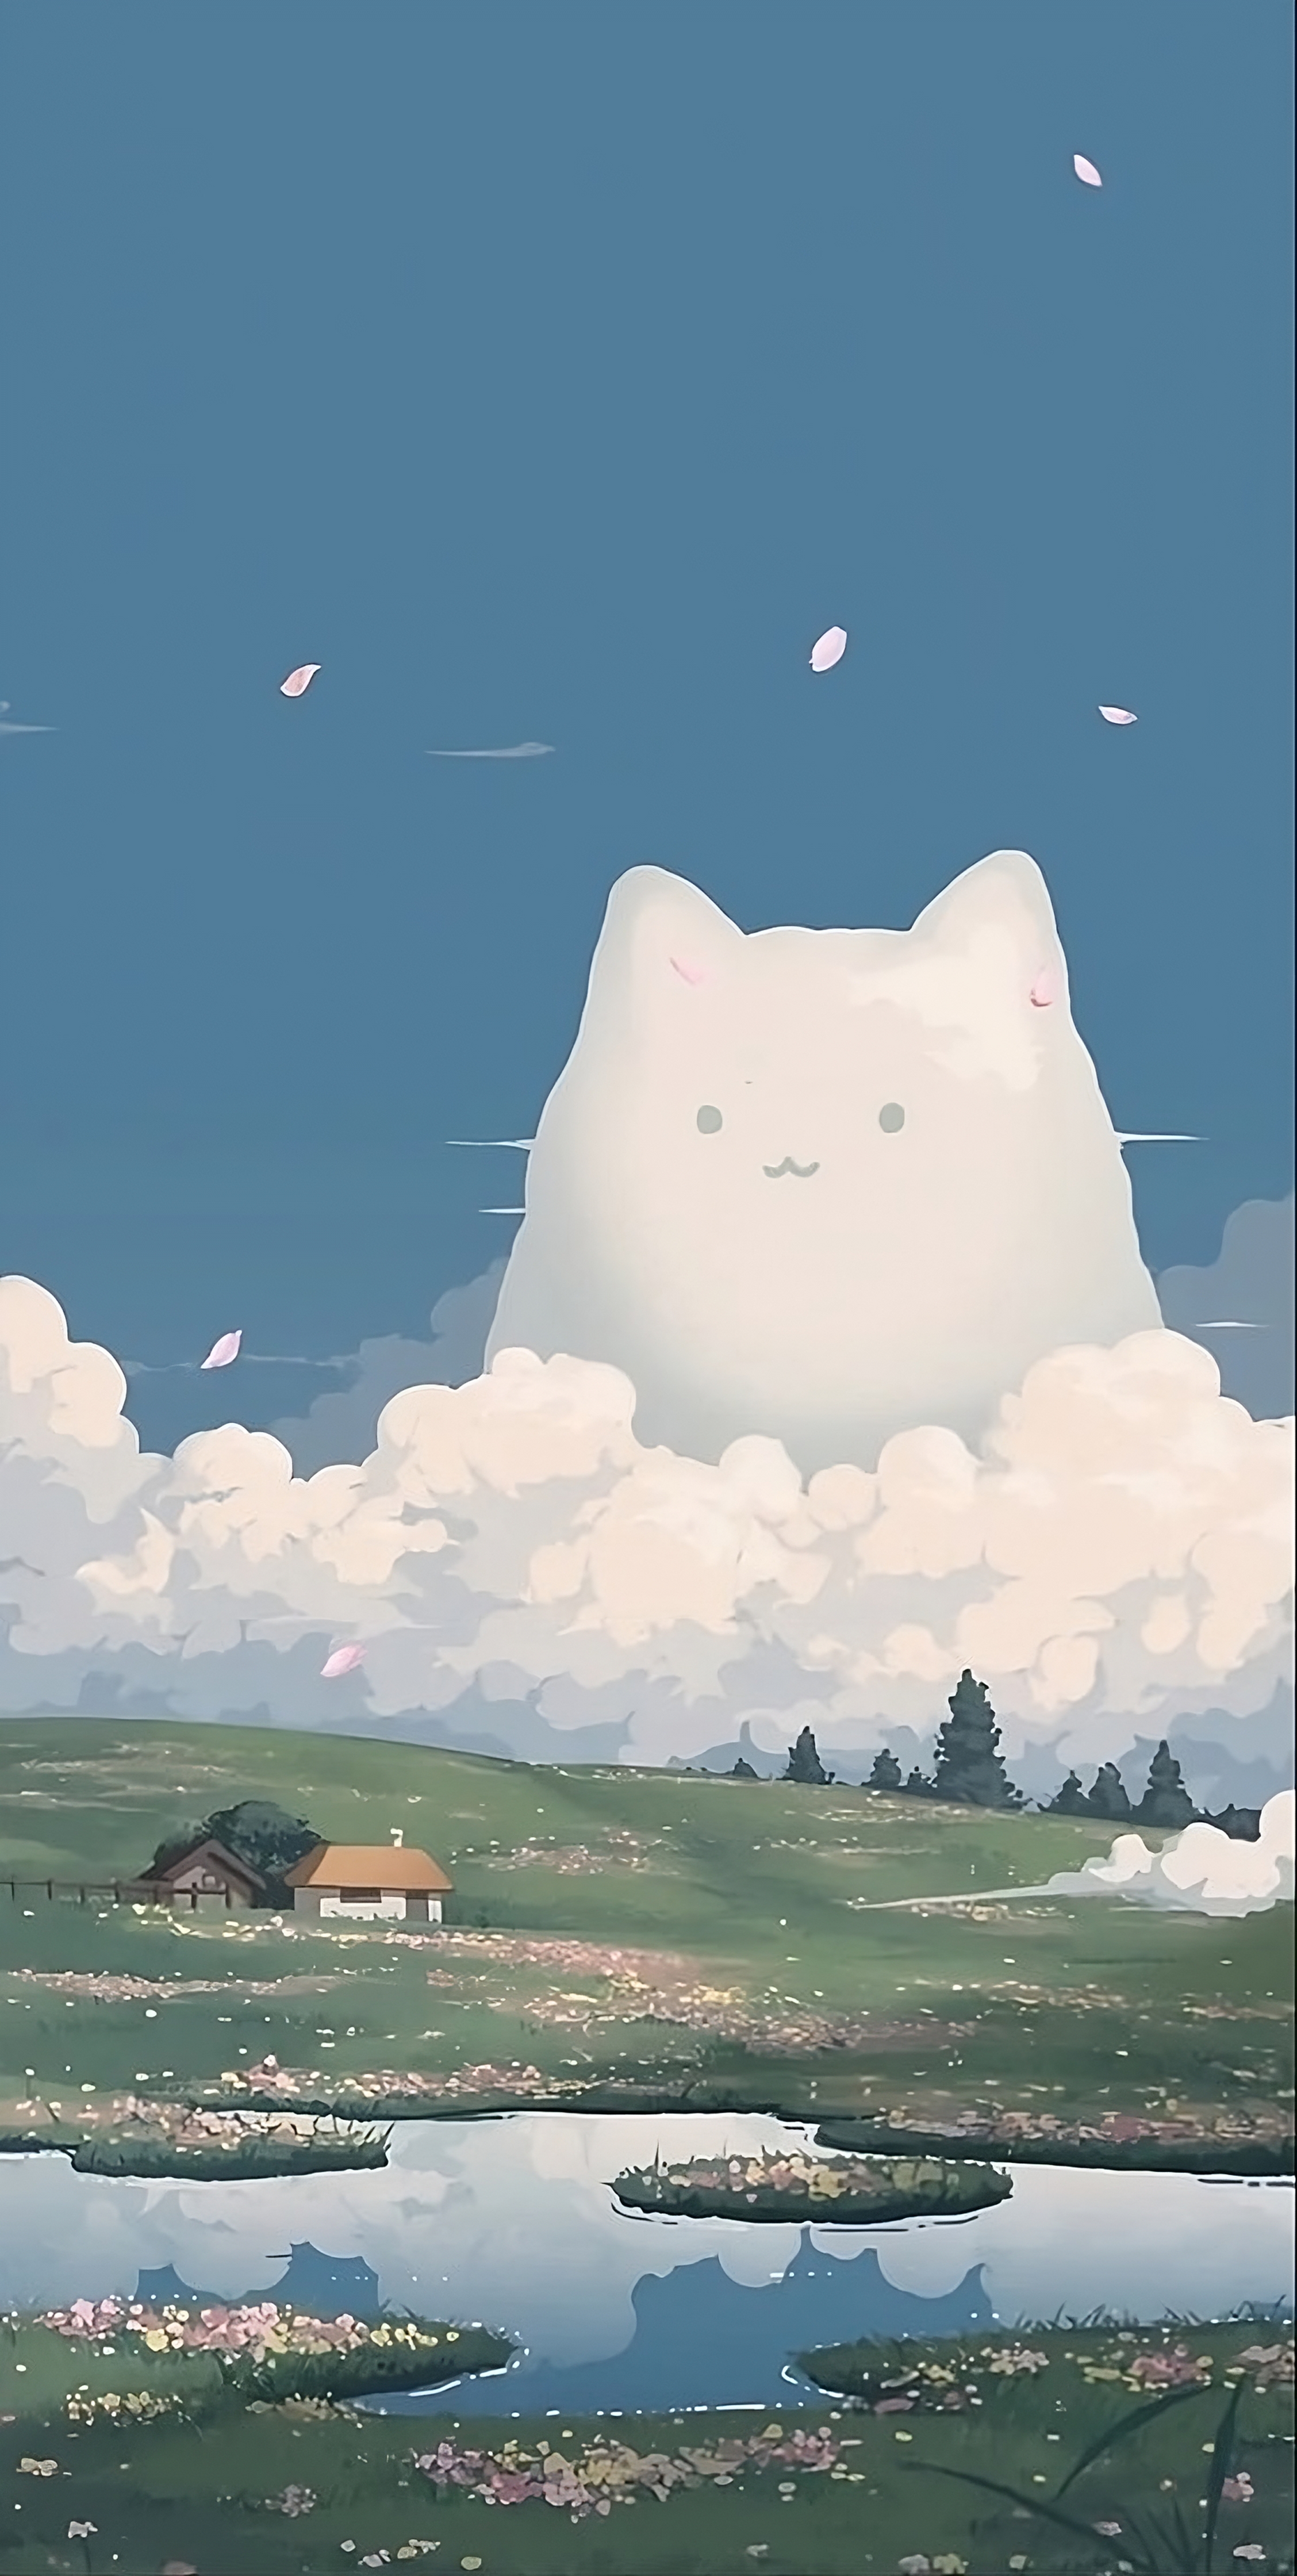 Studio Ghibli Cat Boy Cat Girl Clouds Landscape Rural Clear Sky Big Cats Whiskers Water Reflection F 2256x4480